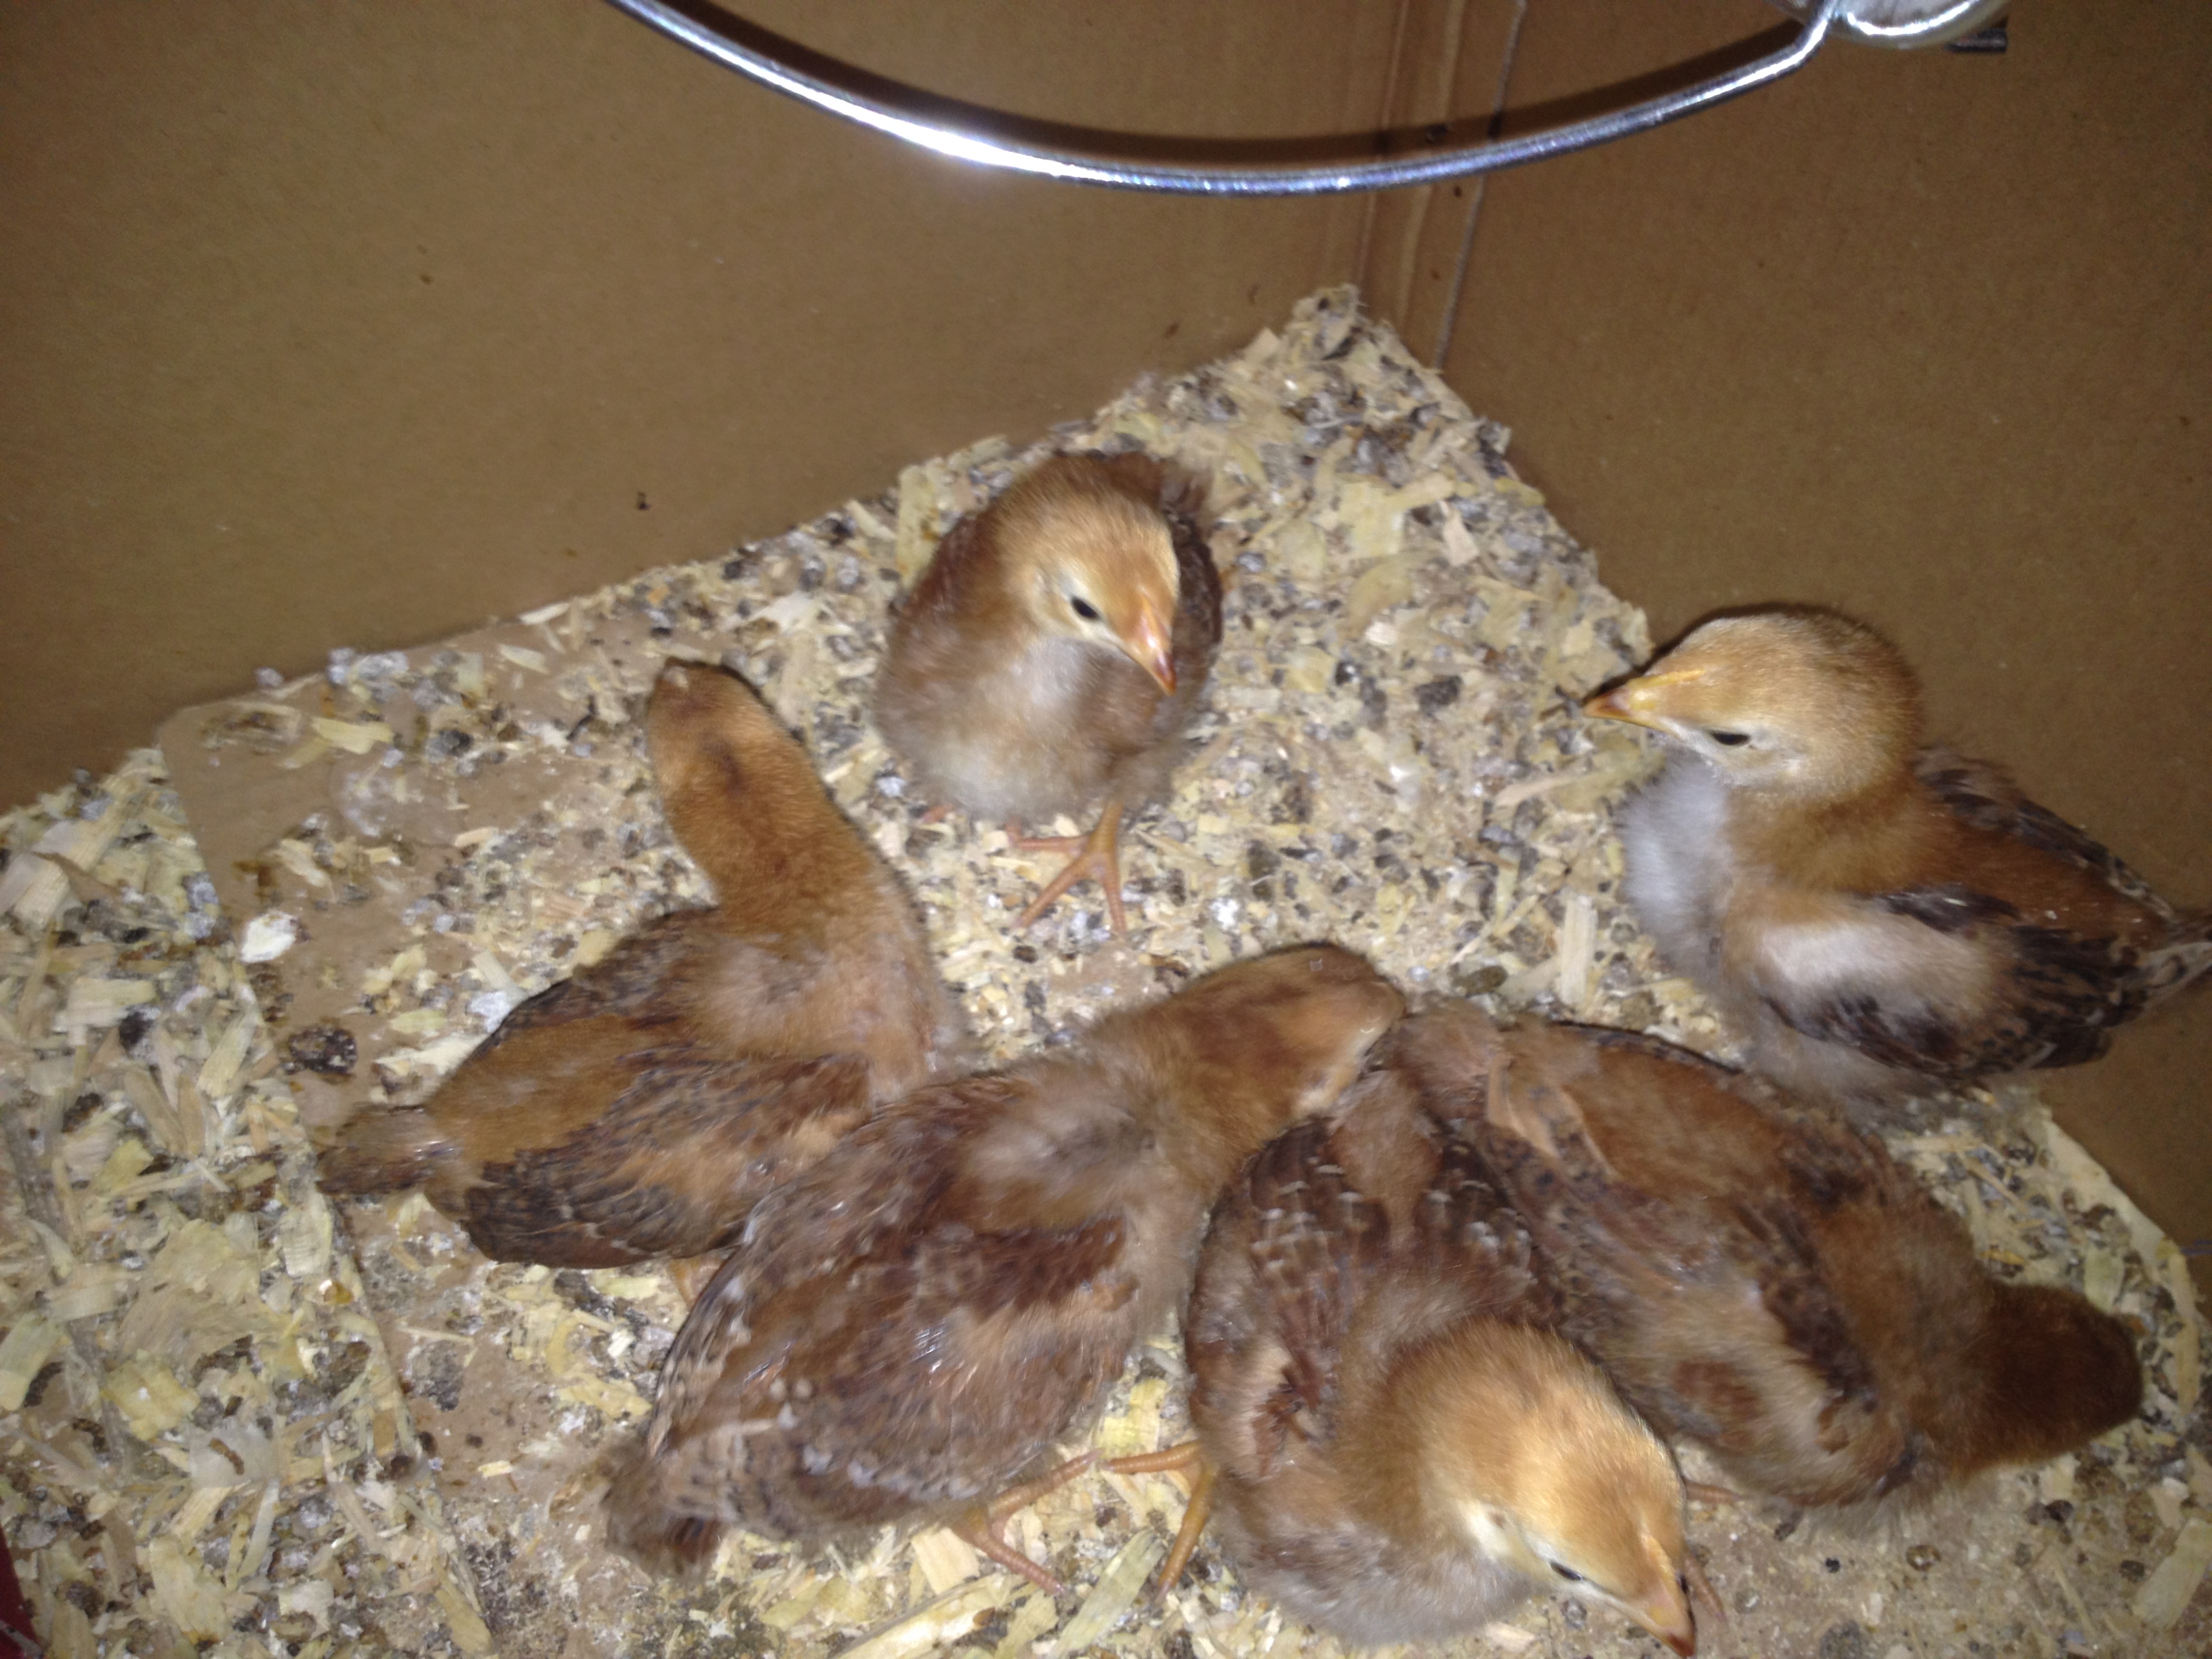 How old are these Rhode Island Reds? I bought them from a local distributor 12 days ago and he said they were only a couple of days old. But they've gotten feathers and big quickly, and I now suspect they are older. Any ideas? It doesn't matter other than I'm looking to better match up age with development.